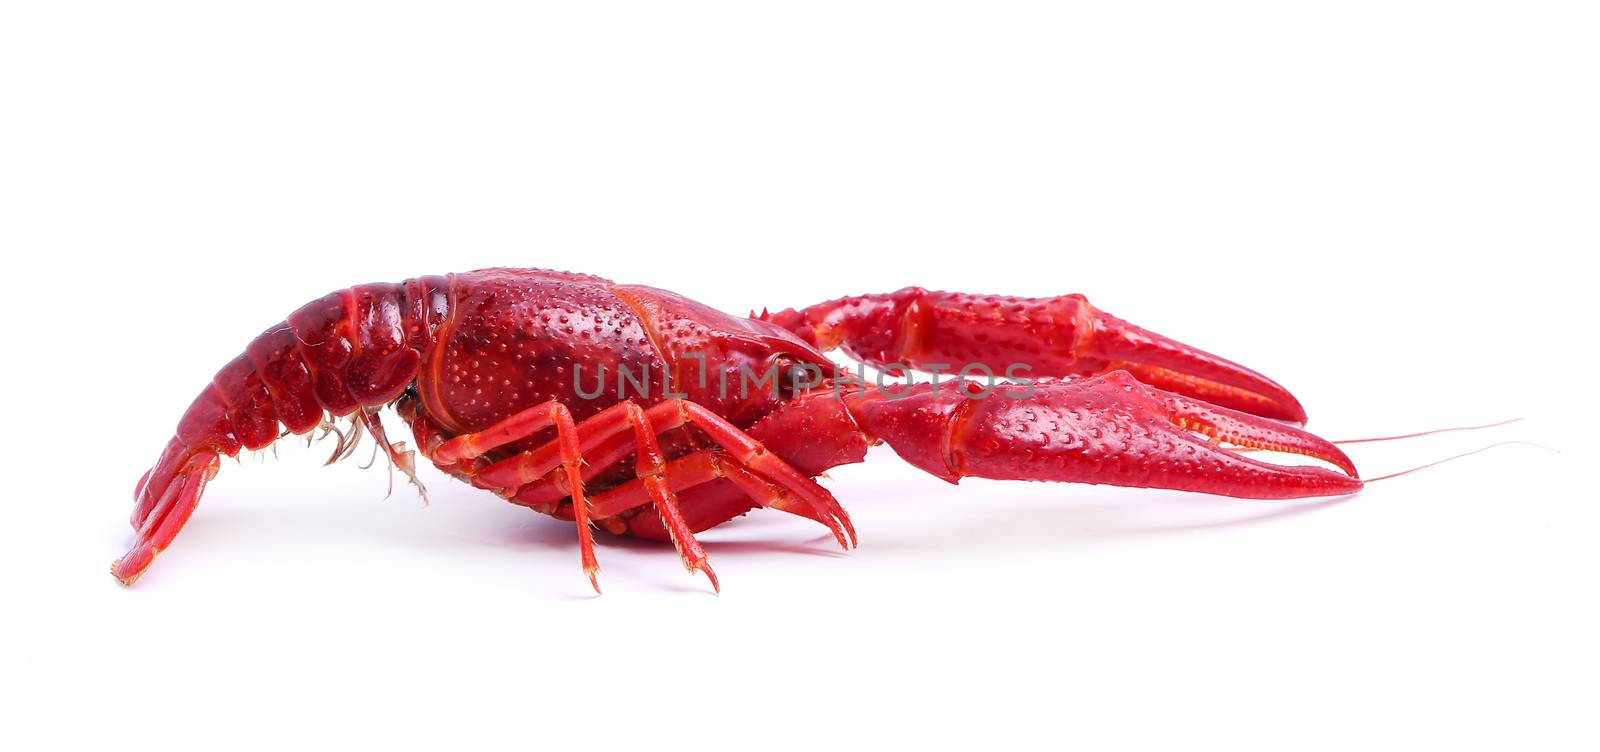 Food. Delicious crayfish on a white background